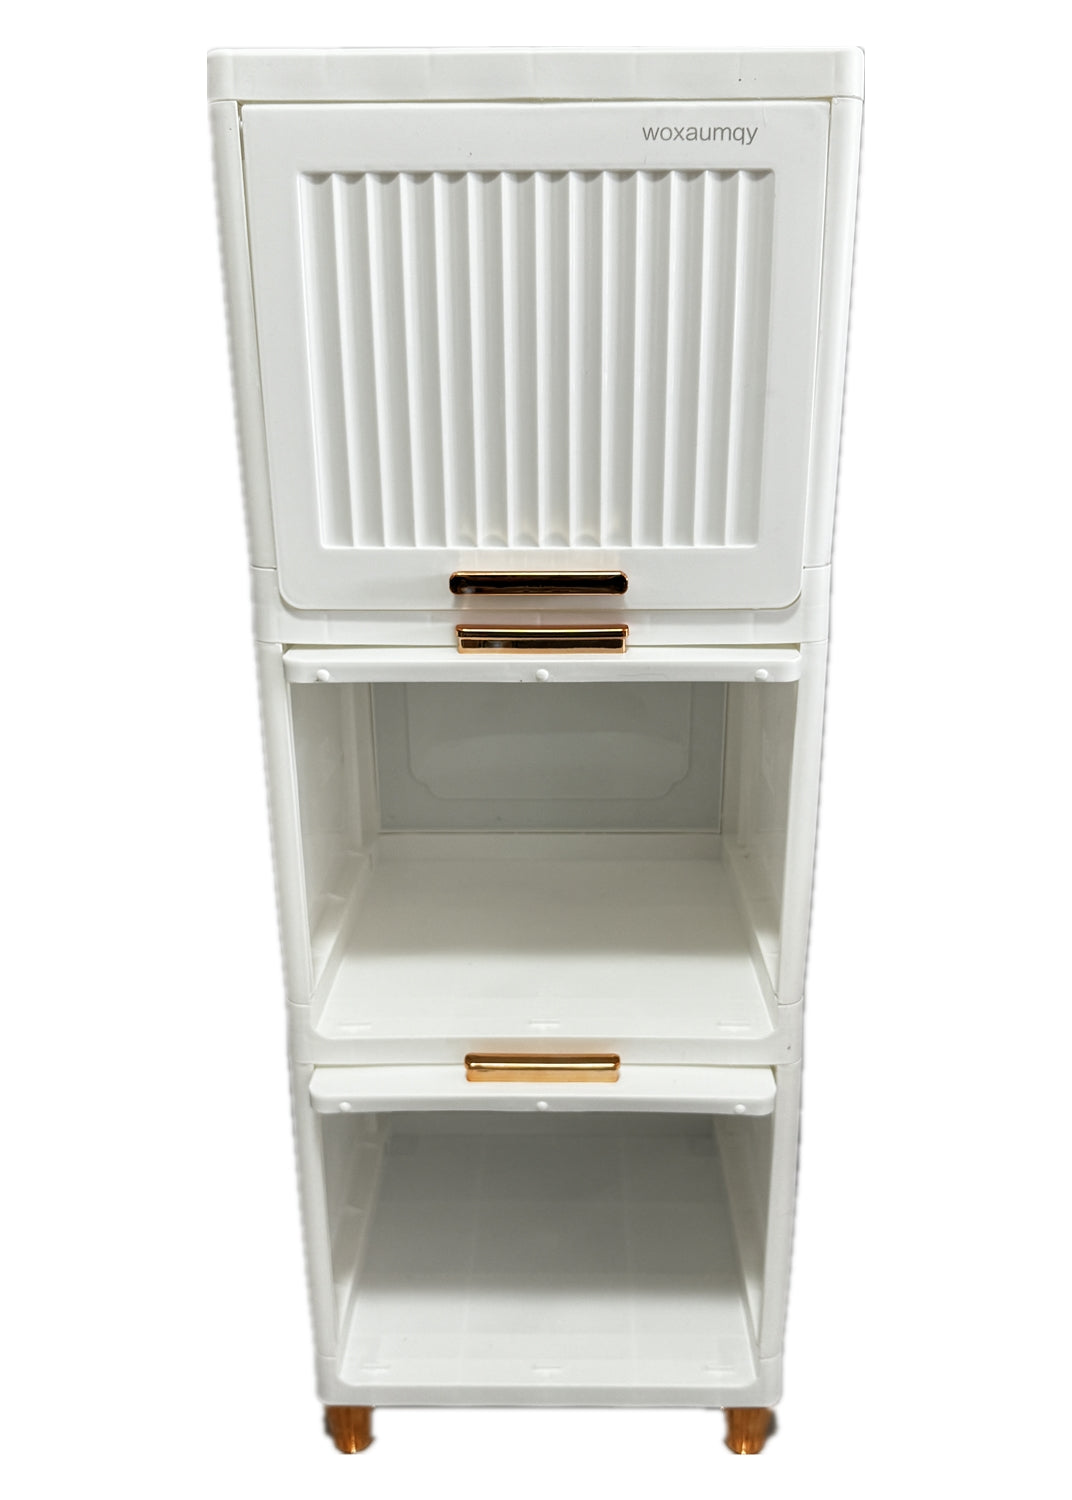 woxaumqy  Lockers（WHITE）Clamshell for Kitchen, toilet, household use-Storage of miscellaneous items【3 layers-35 * 33 * 94cm】